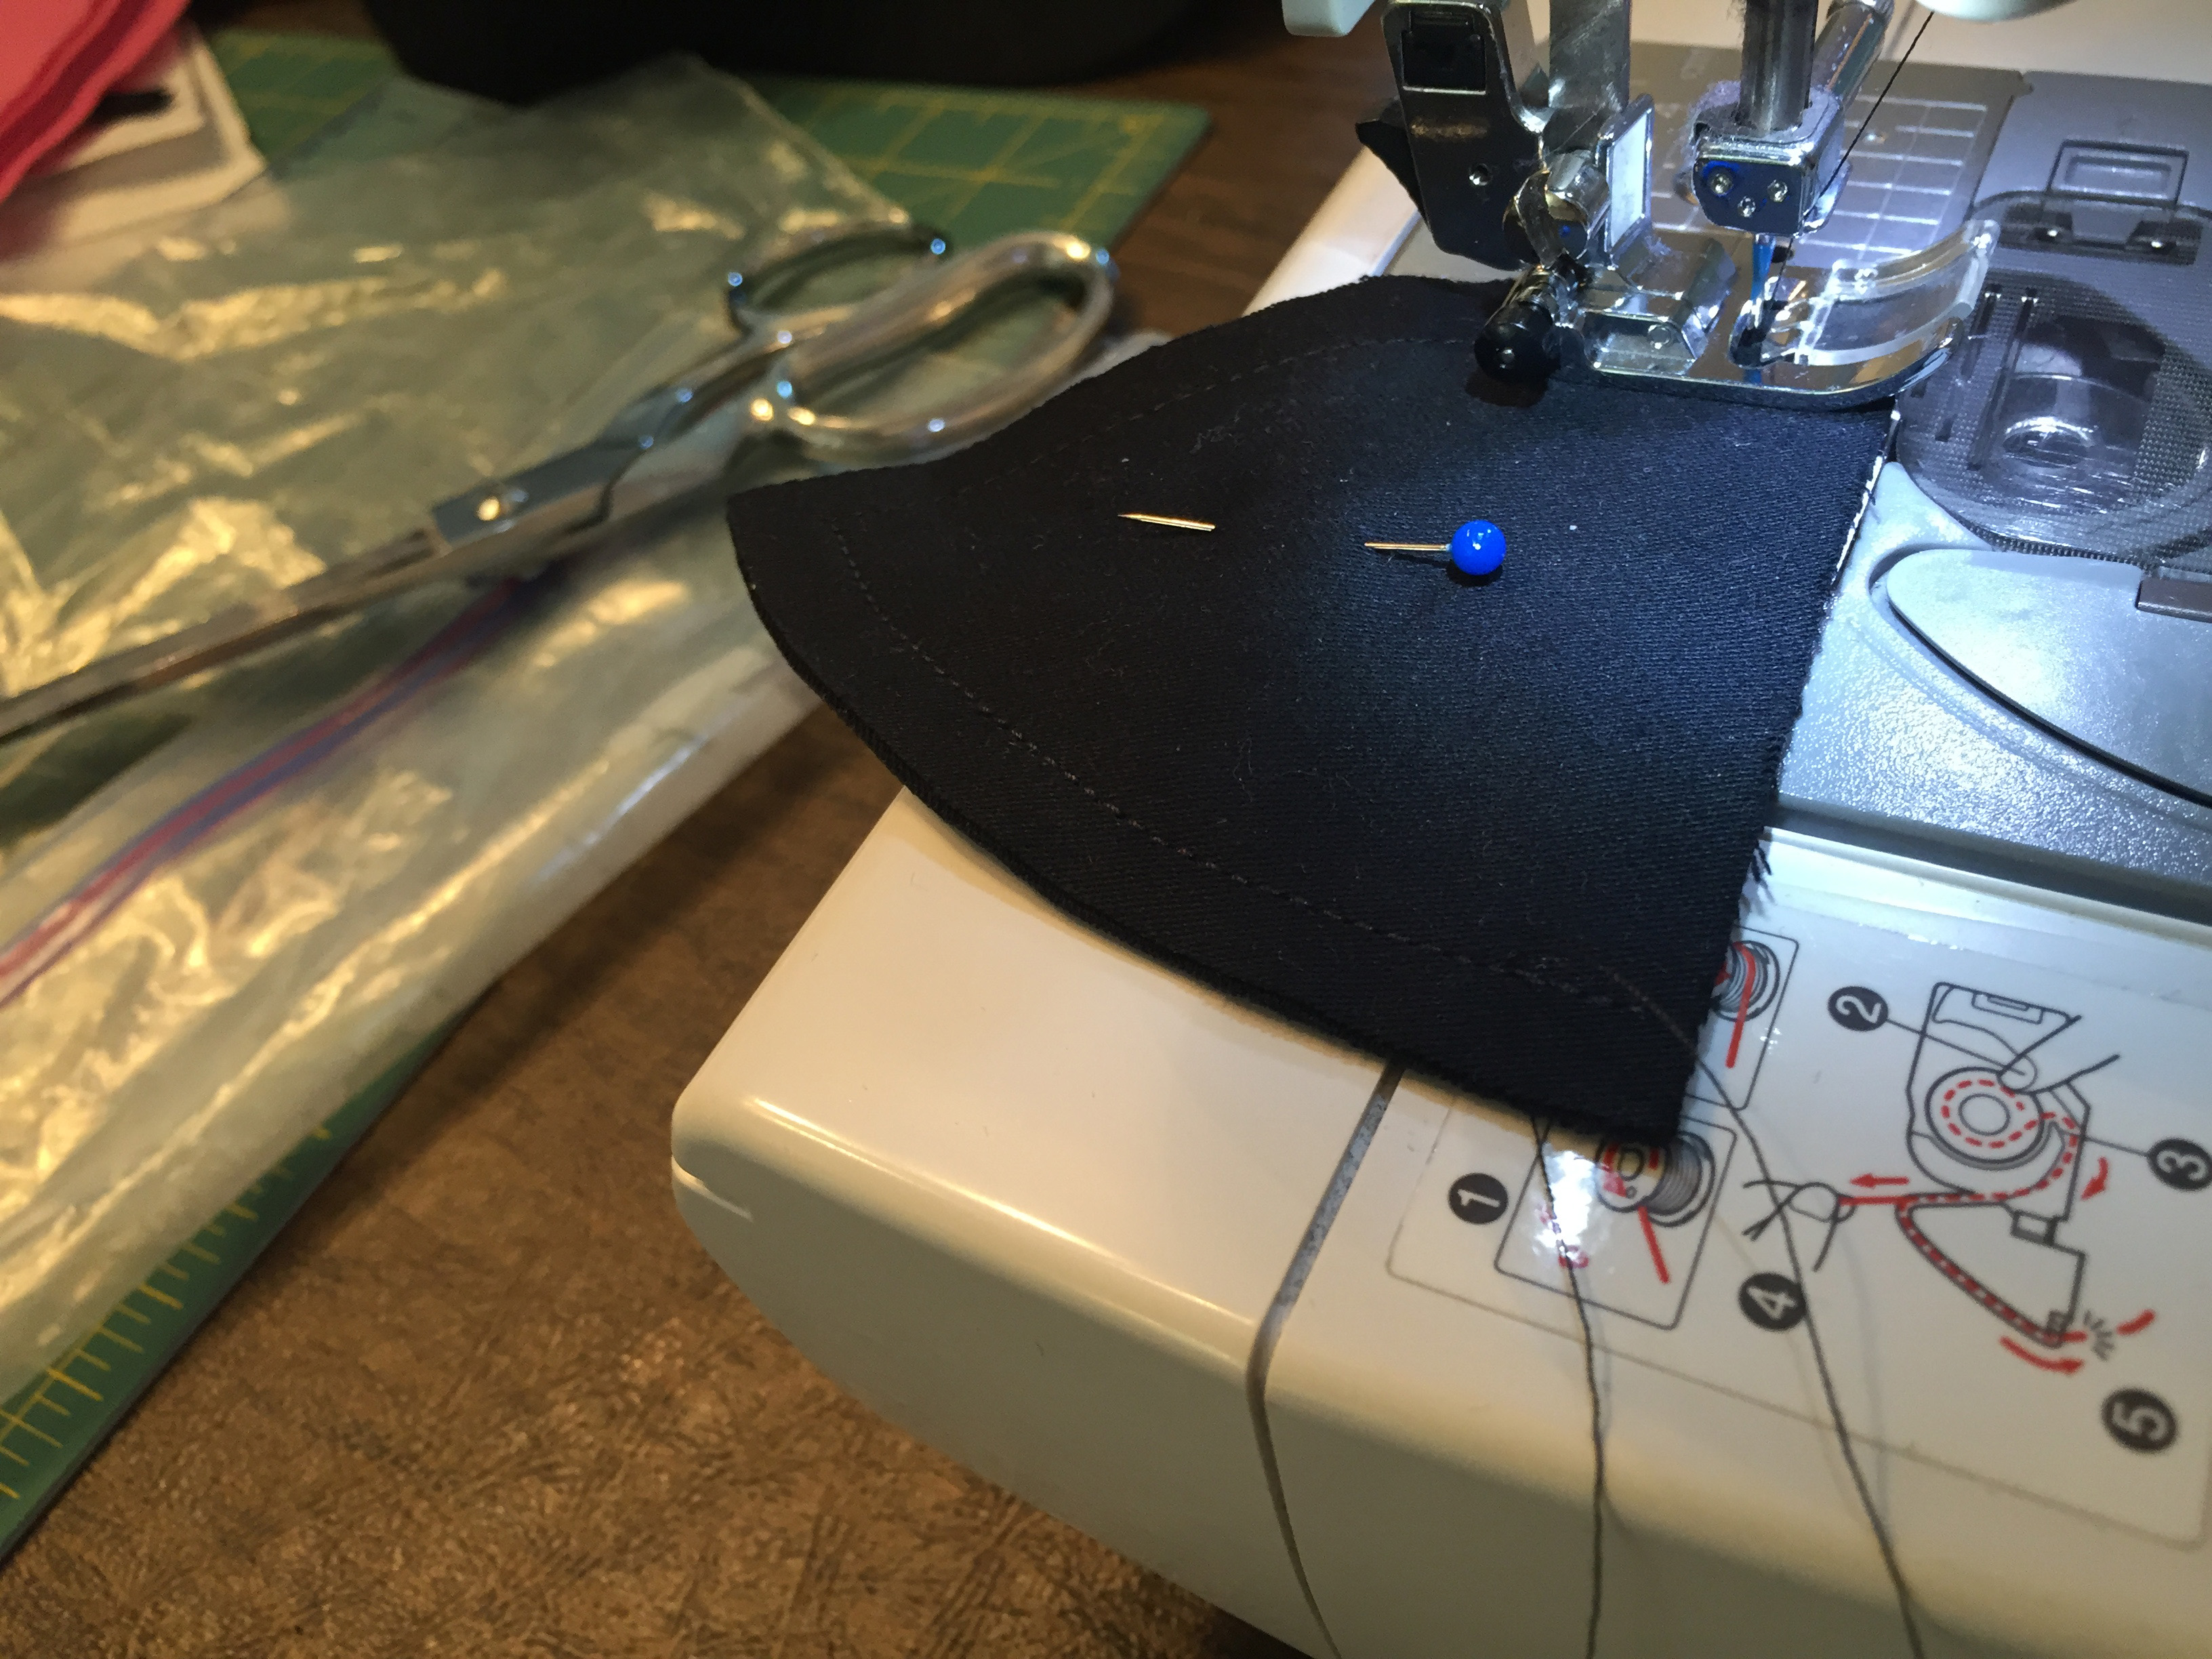 pinned_outer_ear_in_sewing_machine.jpg